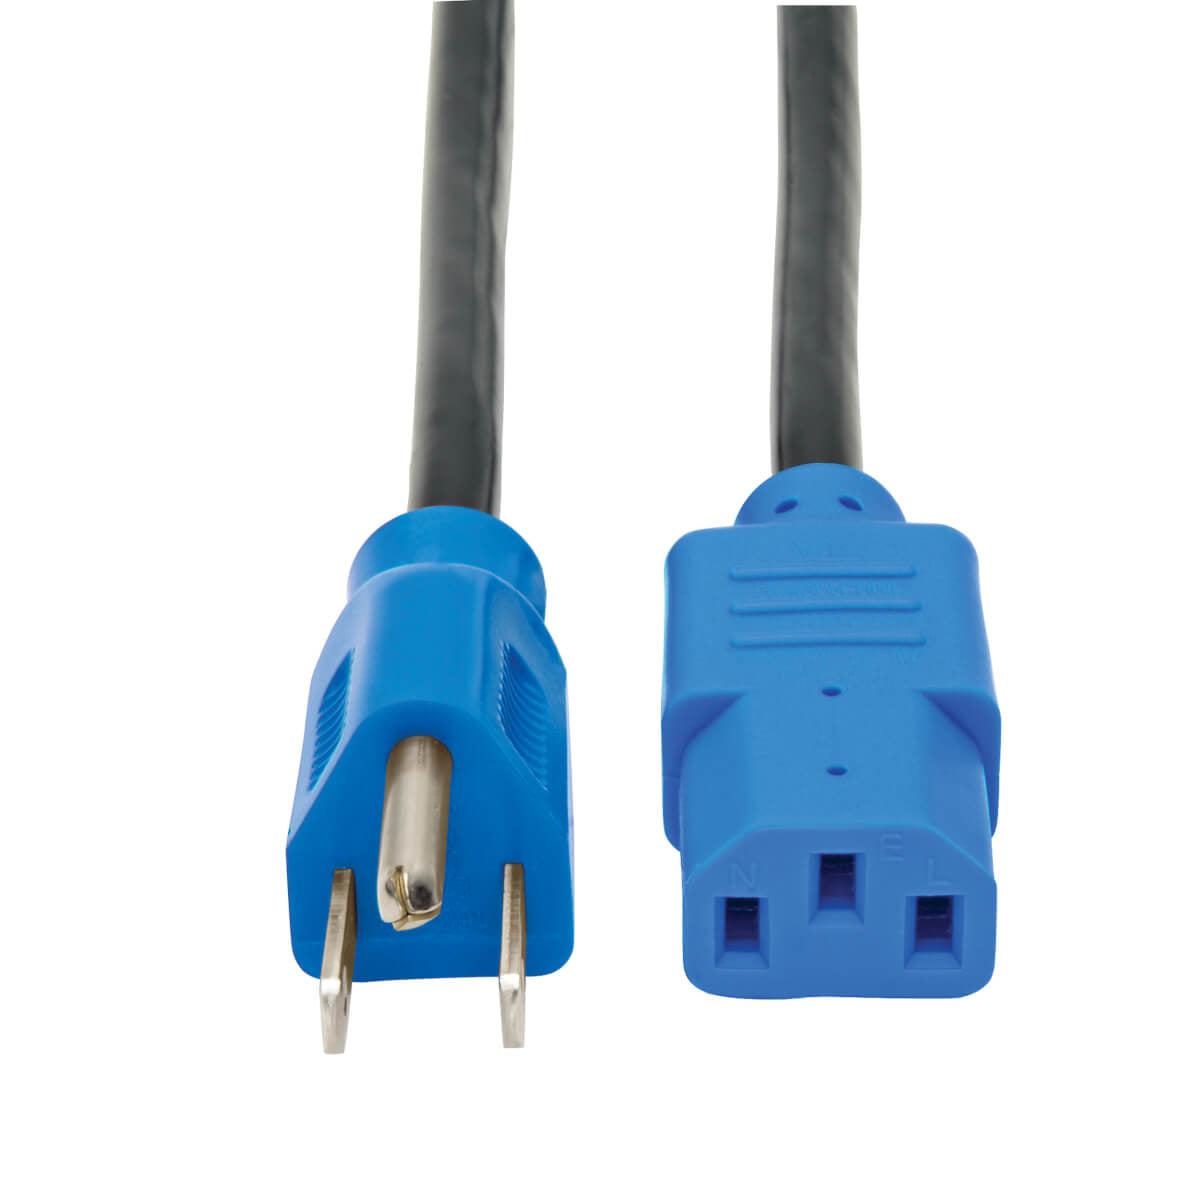 Tripp Lite Universal Computer Power Cord Lead Cable, 10A, 18Awg (Nema 5-15P To Iec-320-C13 With Blue Plugs), 1.22 M (4-Ft.)